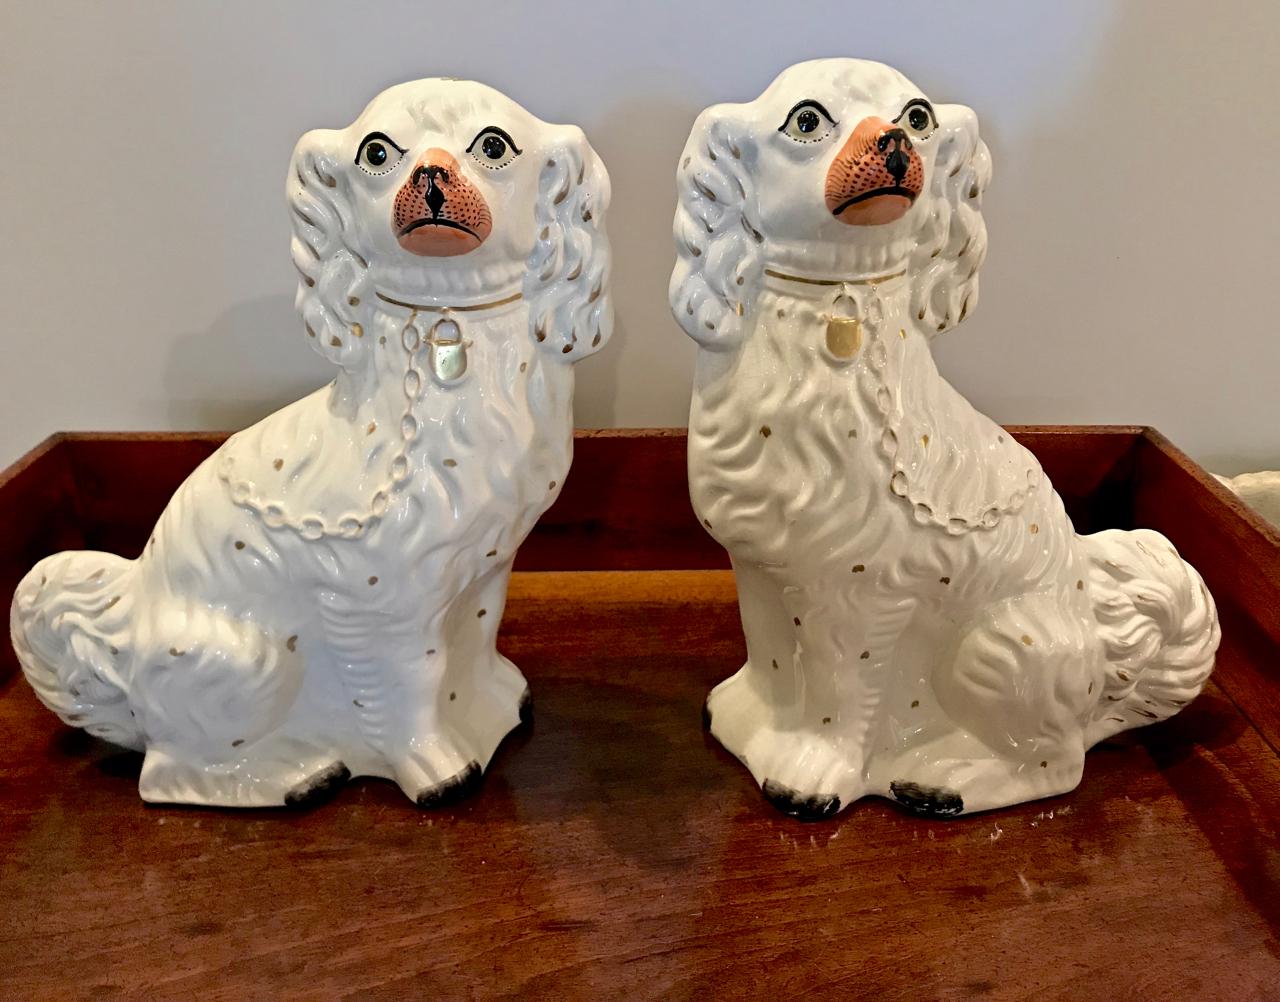 This is a large pair of mid-19th century English Spaniels in white and highlighted with a gold color and leash with a touch of gold to their heads. The dogs measure 12.75 in height and give a great decorative impact.